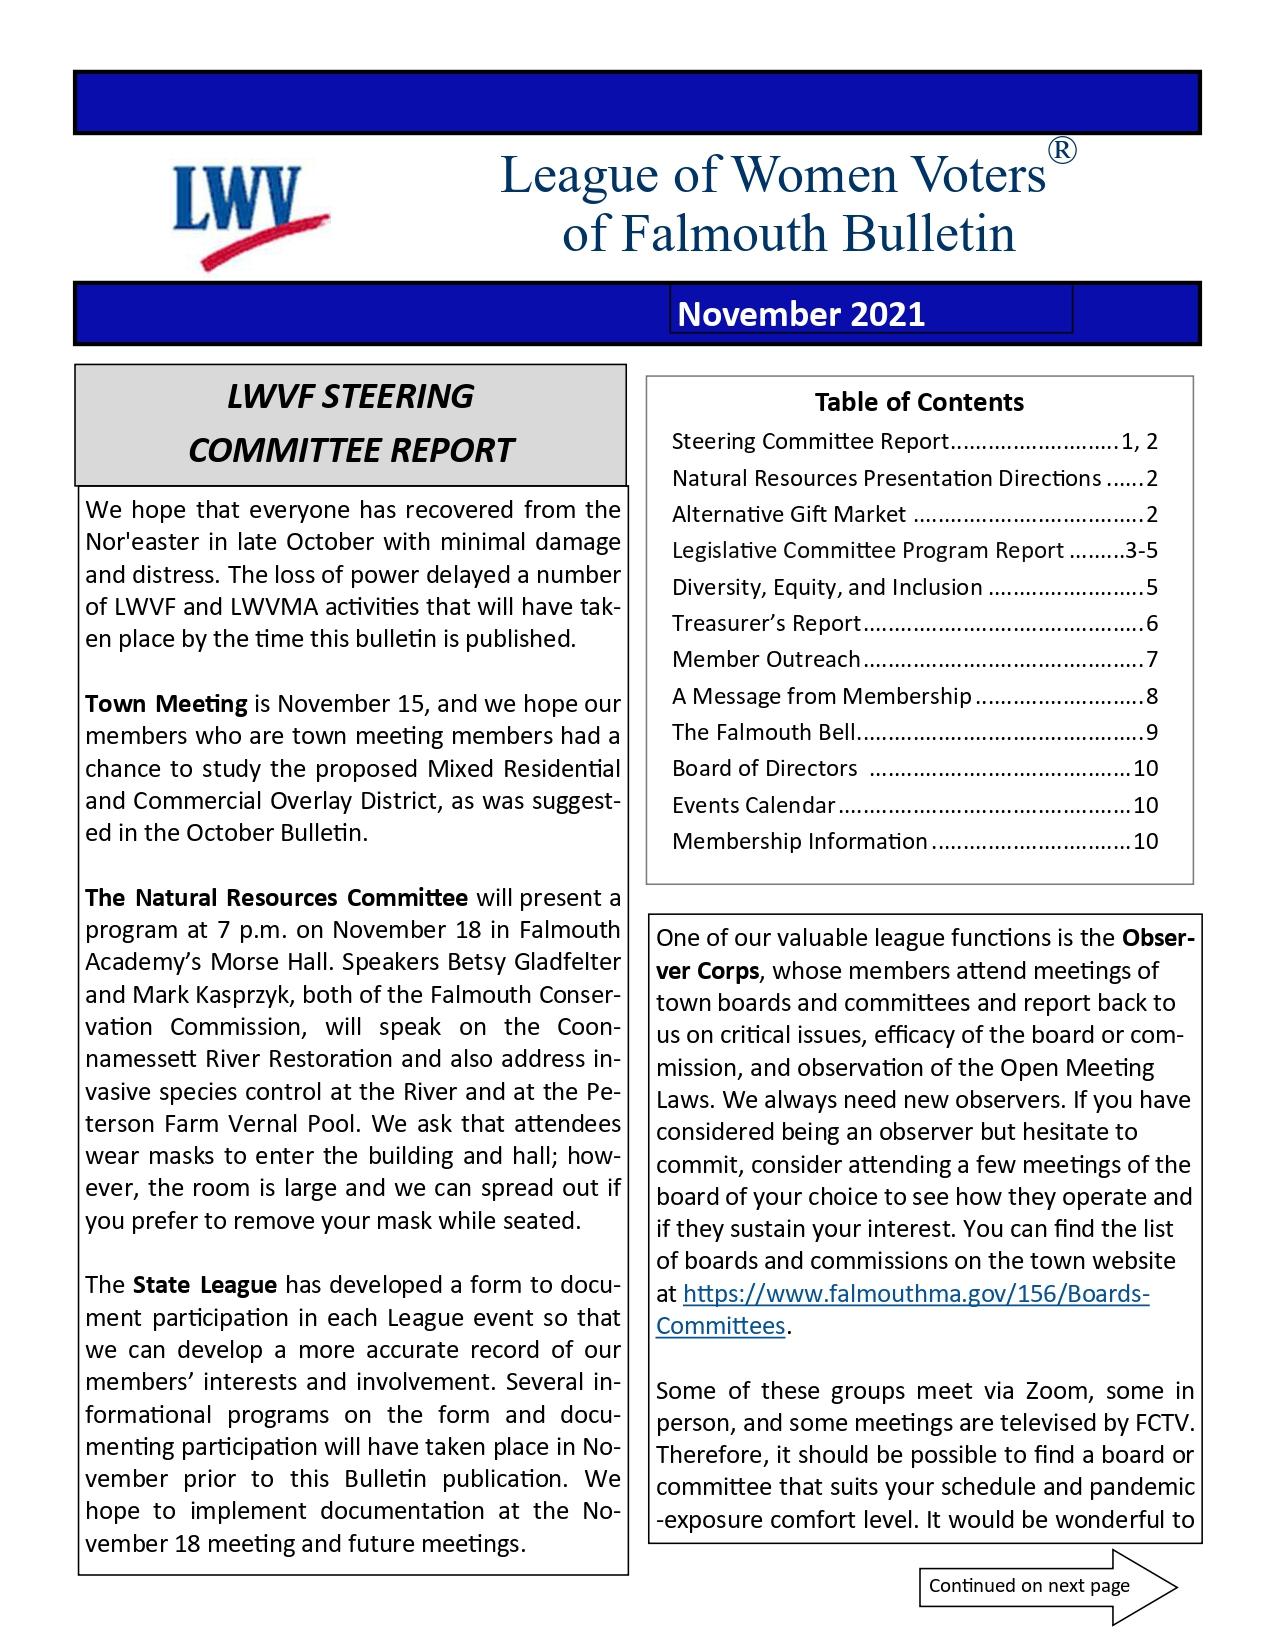 Bulletin Front Page